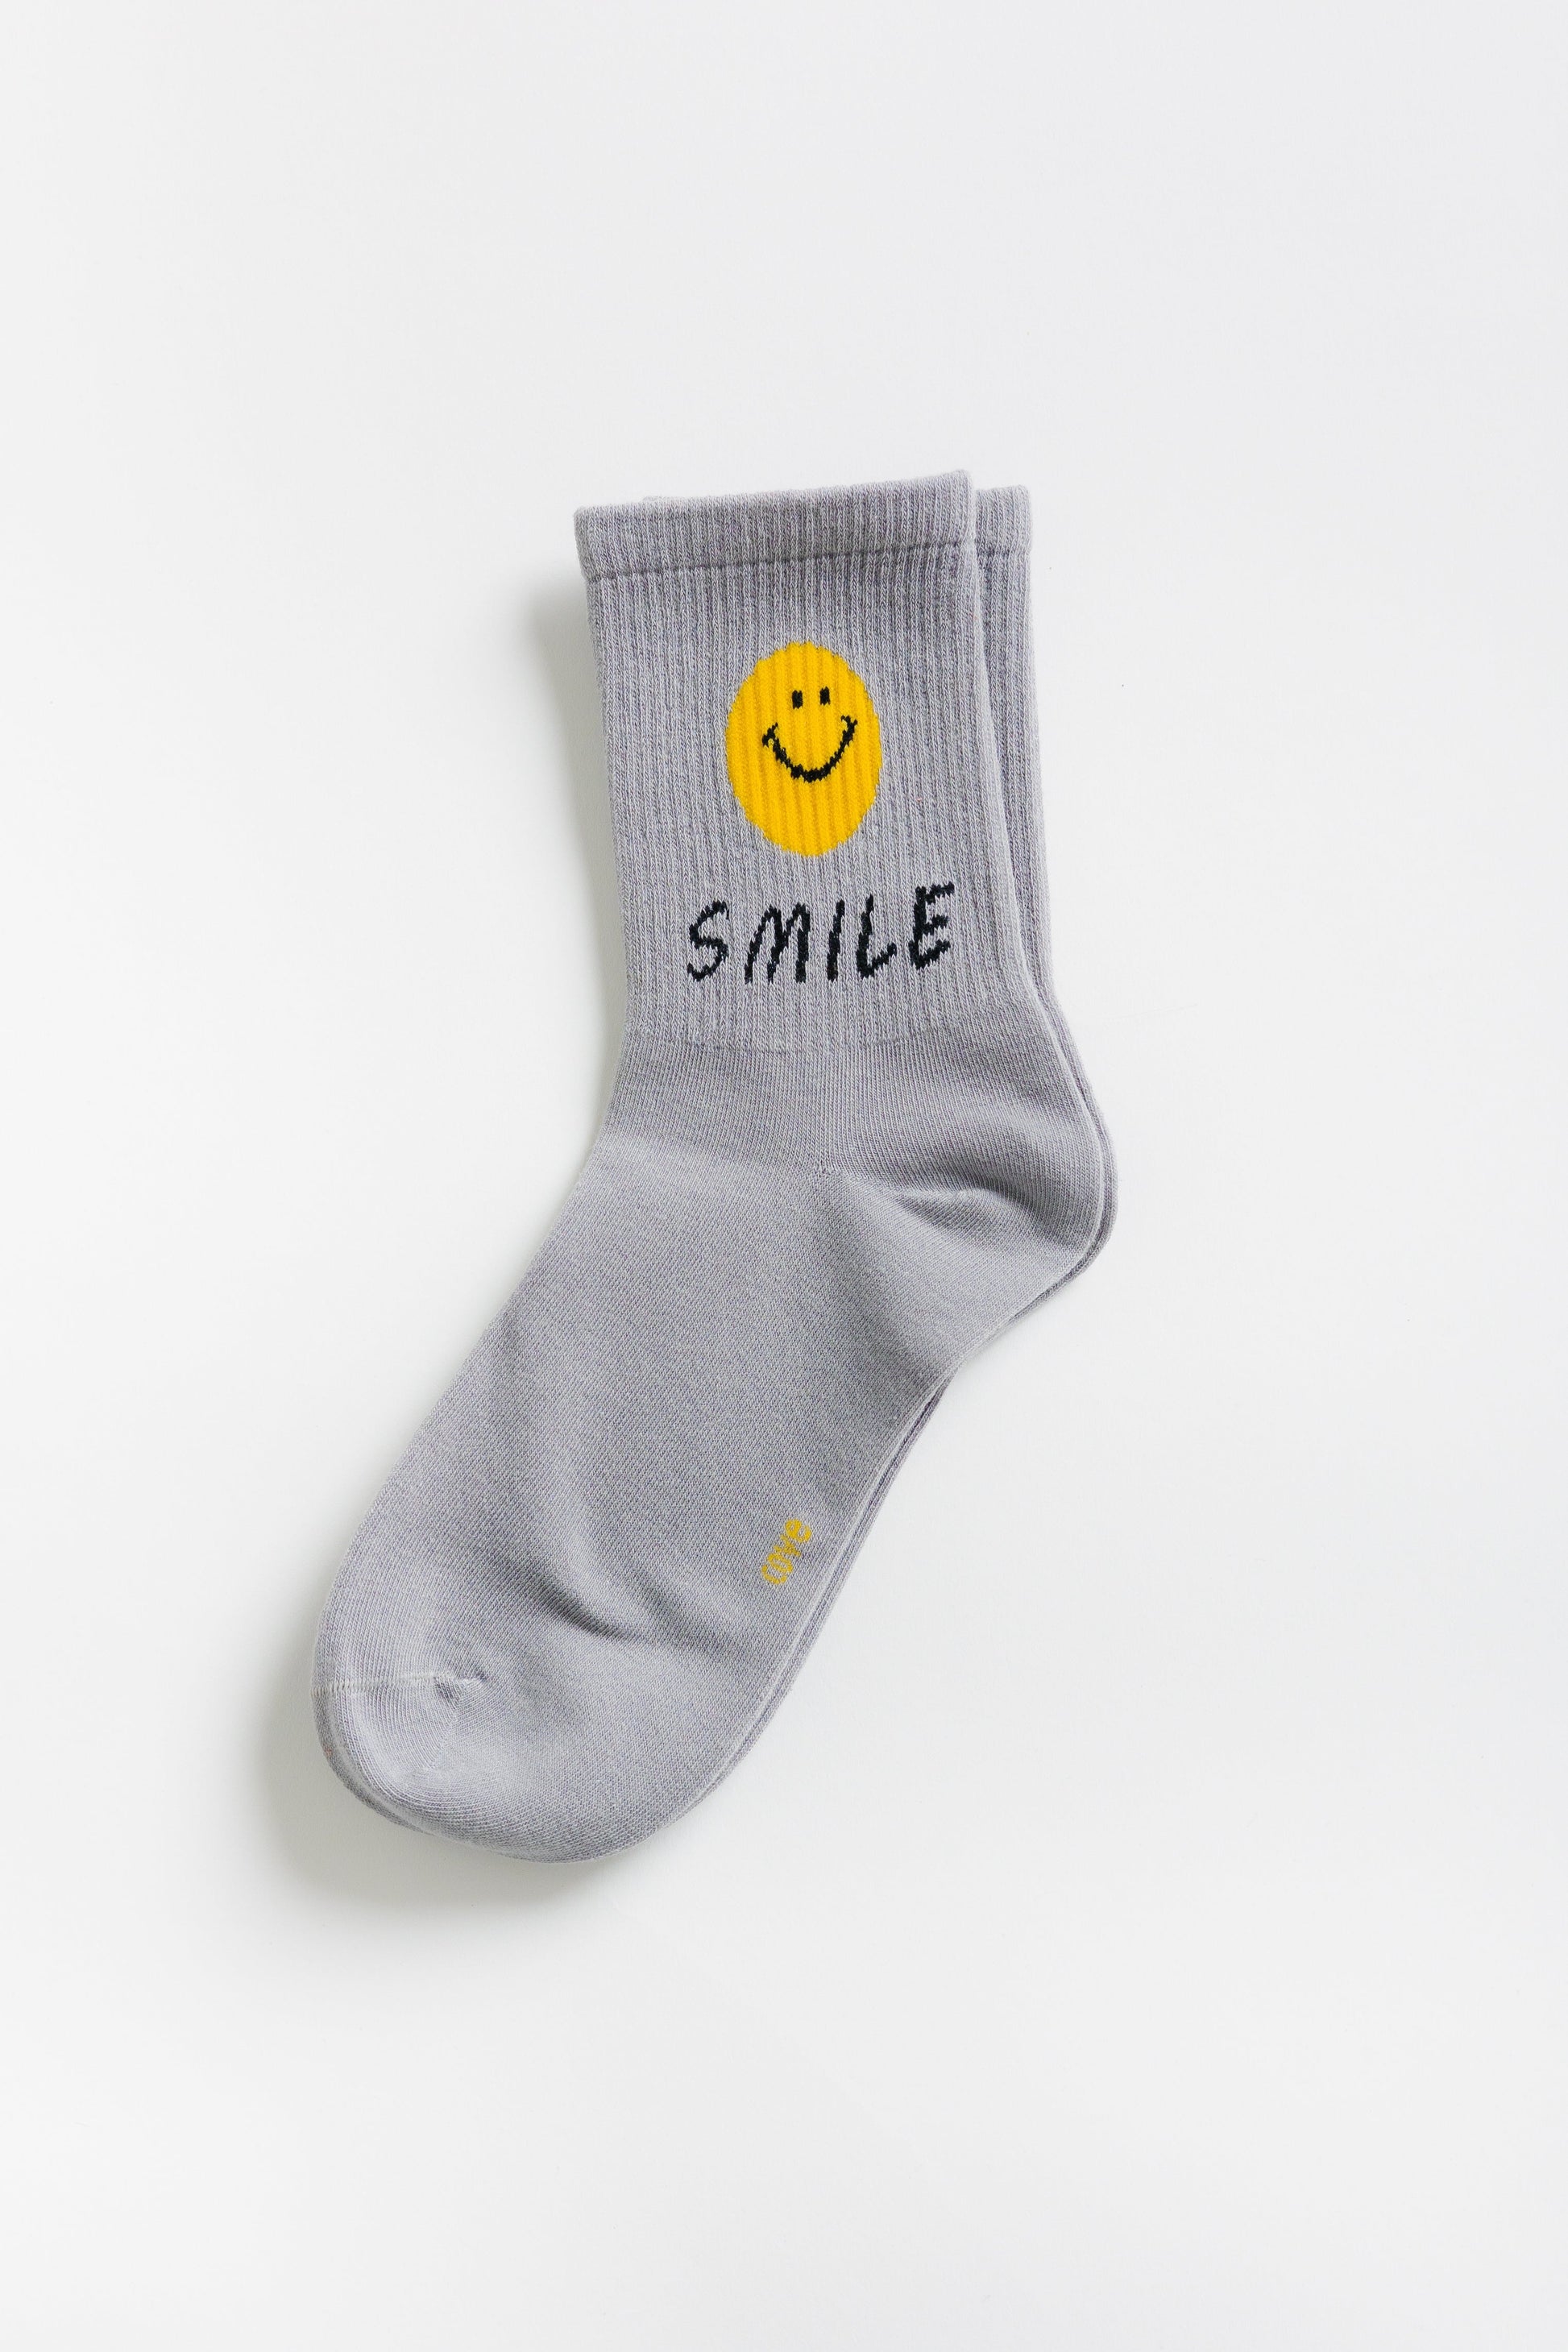 Cove Smile With Me Socks WOMEN'S SOCKS Cove Accessories Grey OS 